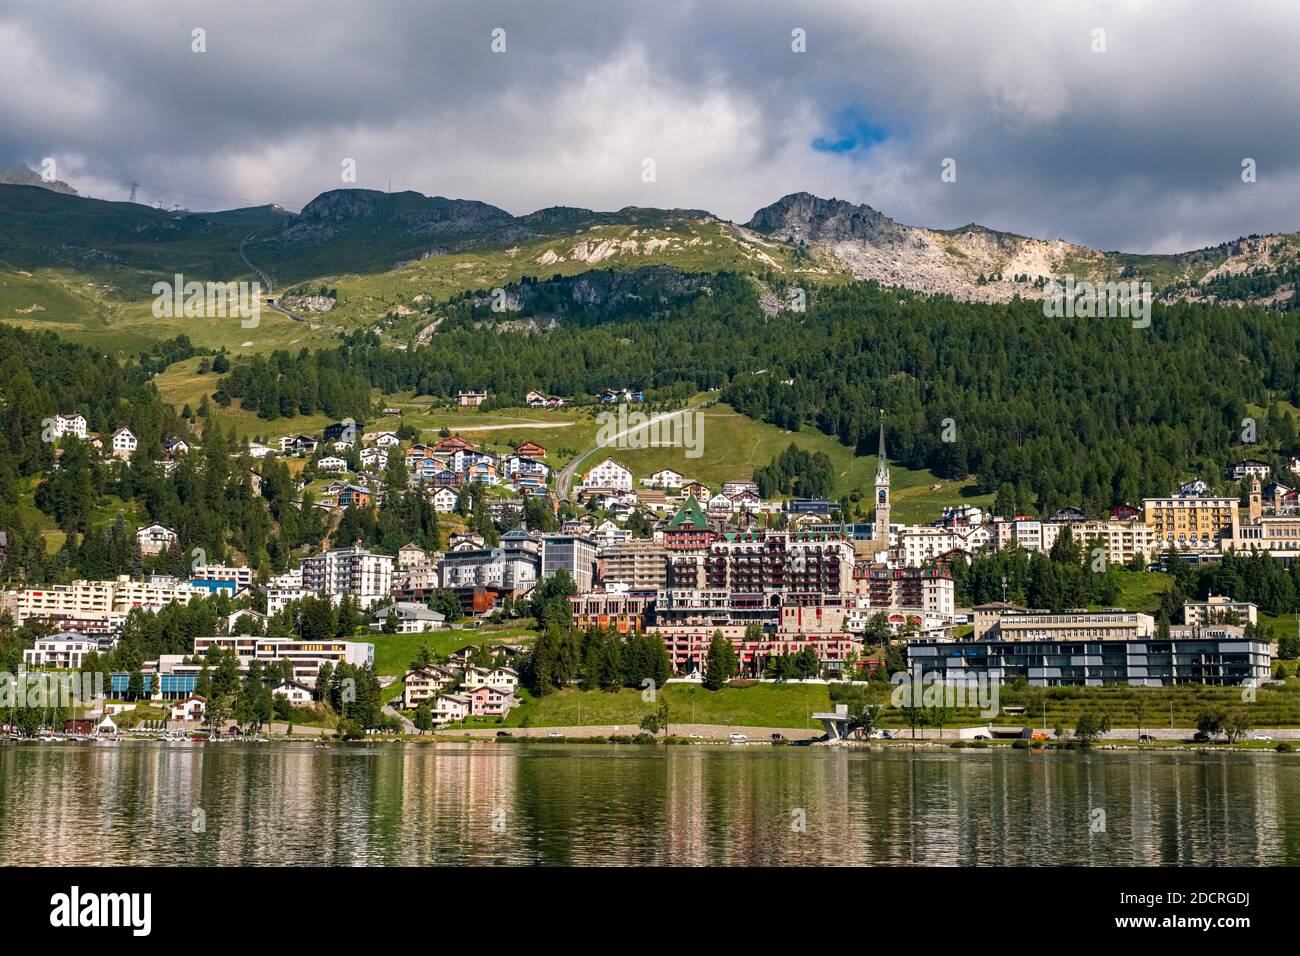 The town of St. Moritz is located at the shore of Lake St. Moritz, the southern slopes of the Albula Alps in the distance. Stock Photo